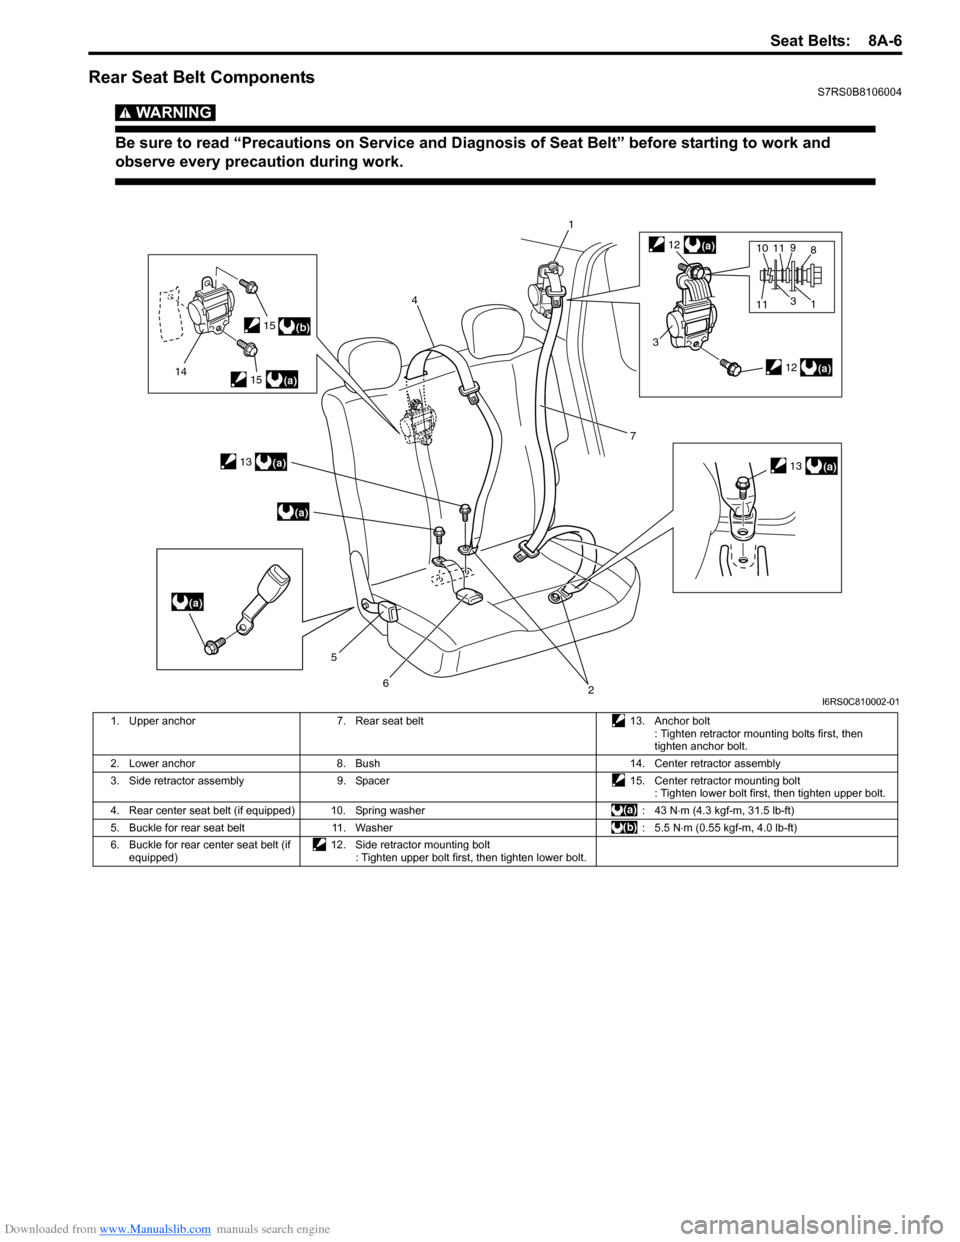 SUZUKI SWIFT 2007 2.G Service Workshop Manual Downloaded from www.Manualslib.com manuals search engine Seat Belts:  8A-6
Rear Seat Belt ComponentsS7RS0B8106004
WARNING! 
Be sure to read “Precautions on Service and Diagnosis of Seat Belt” befo